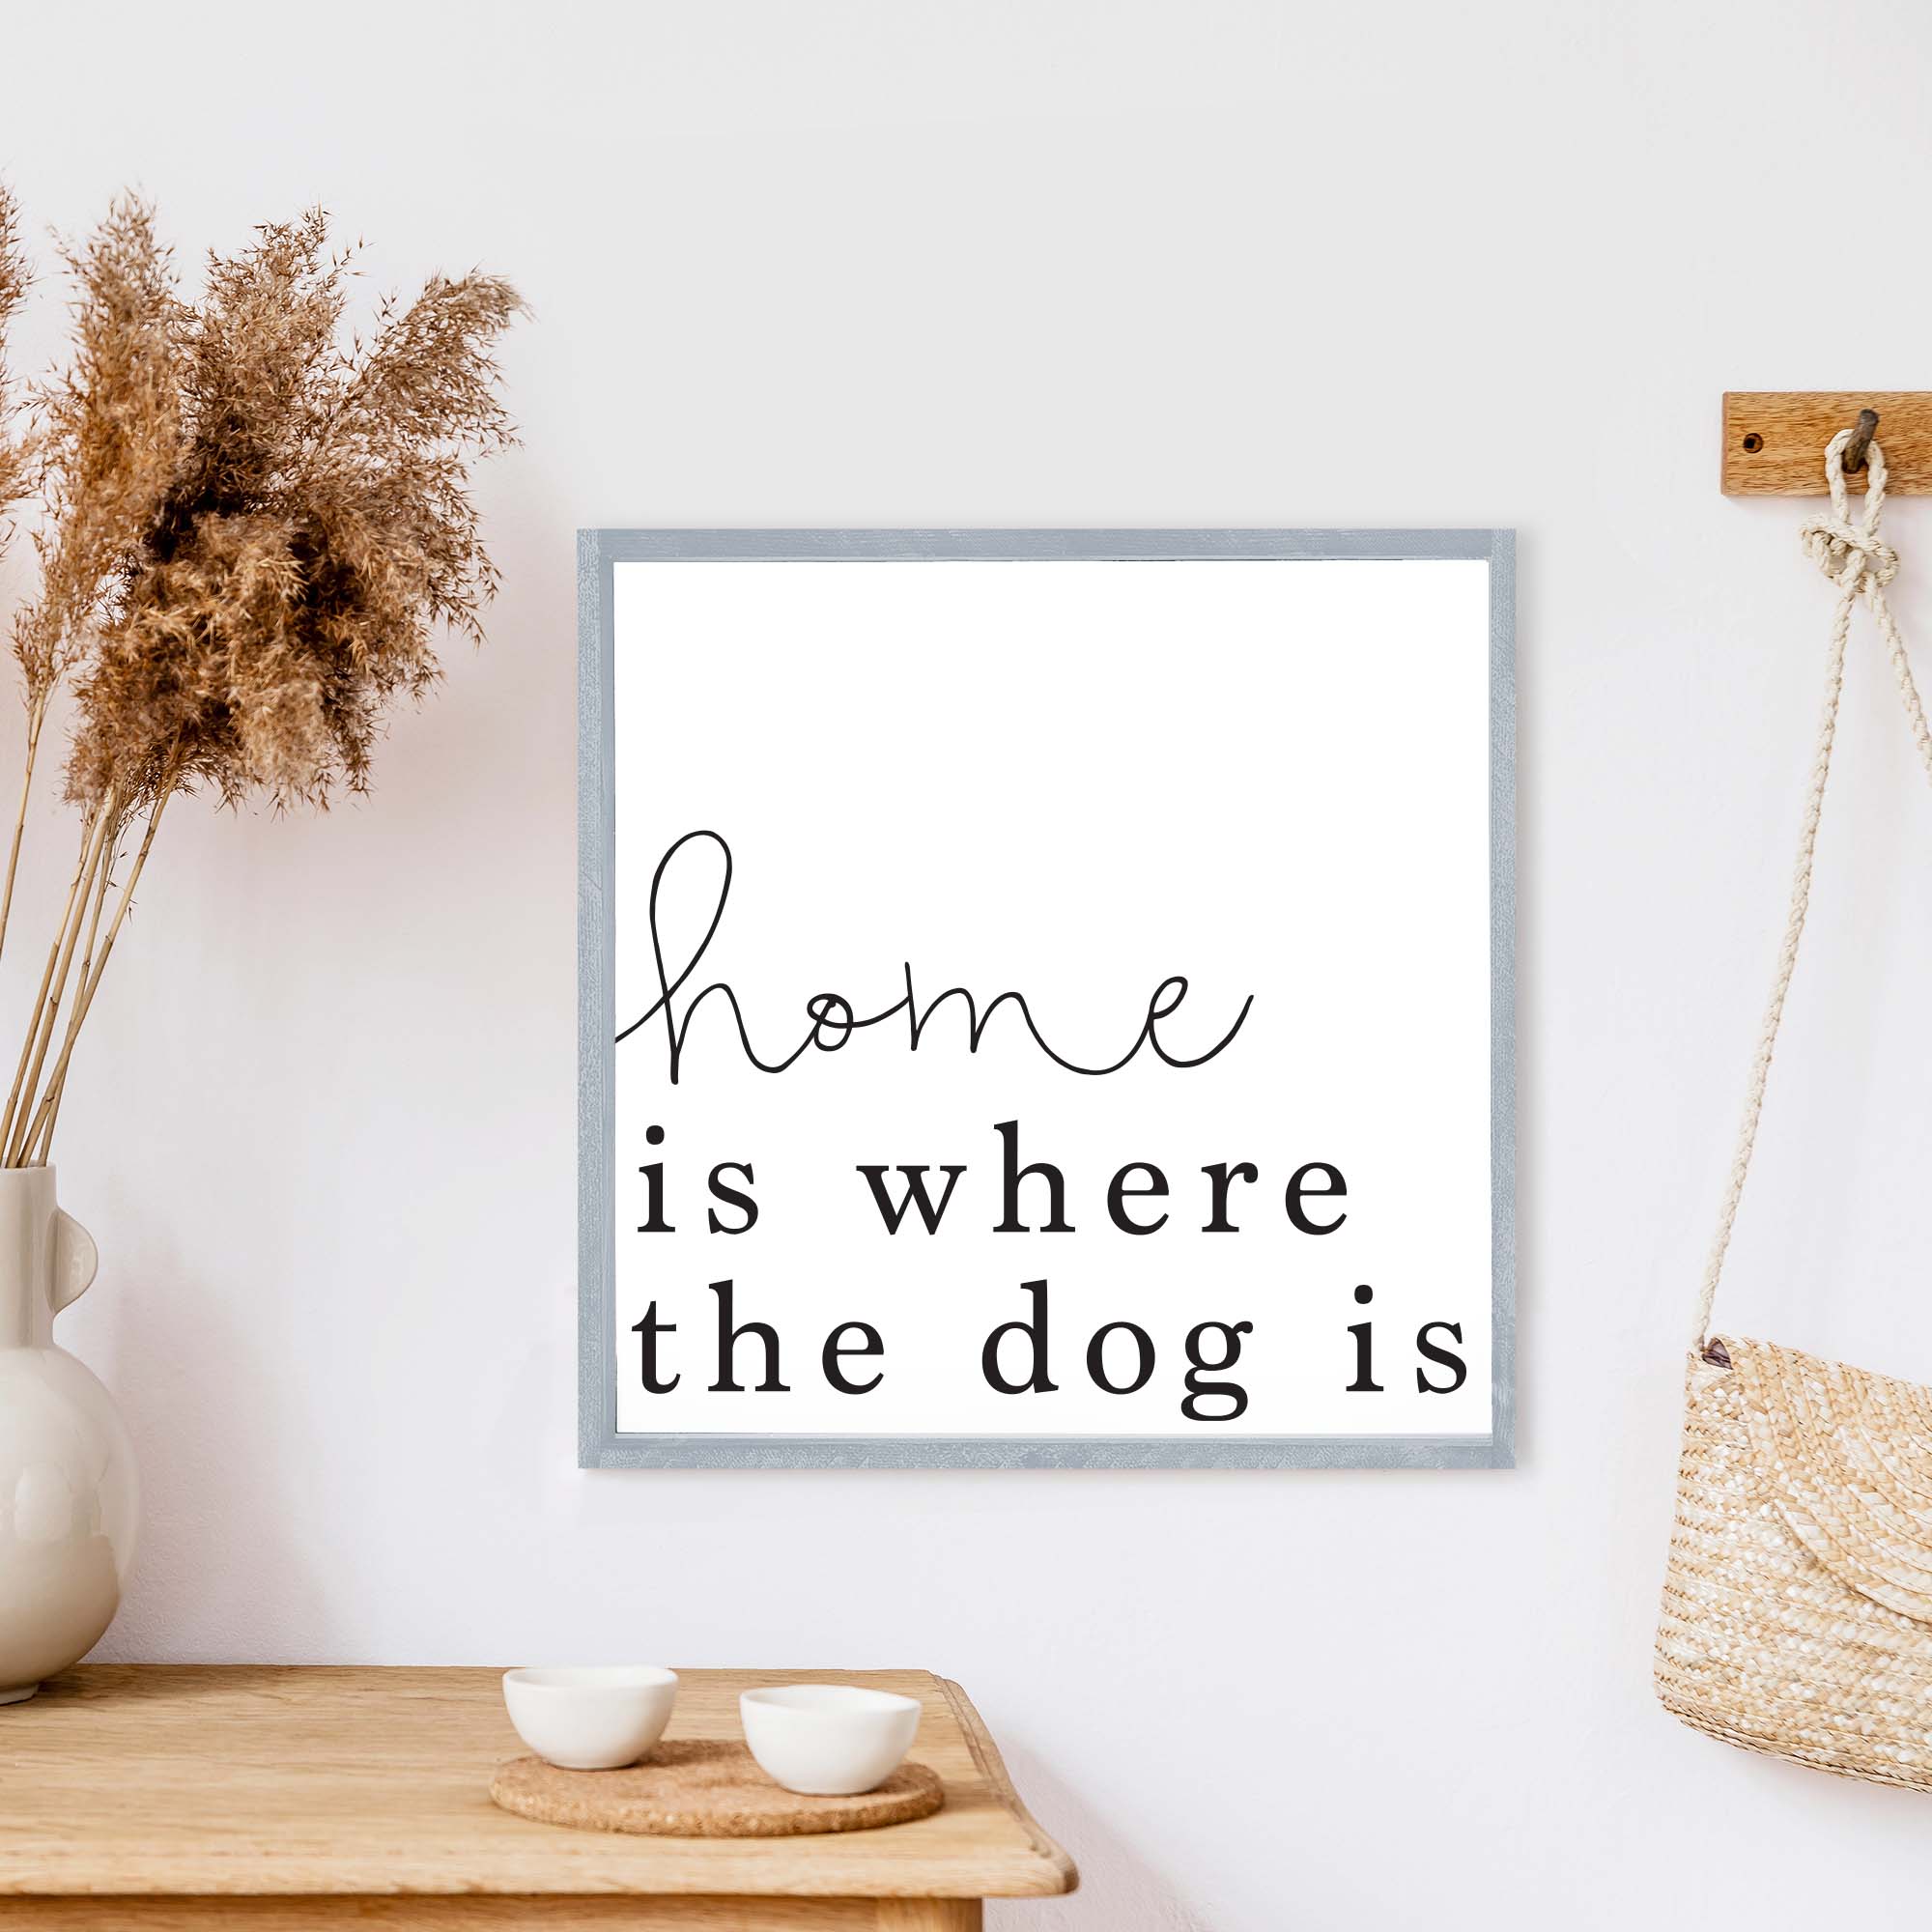 Home Is Where The Dog Is Wood Sign